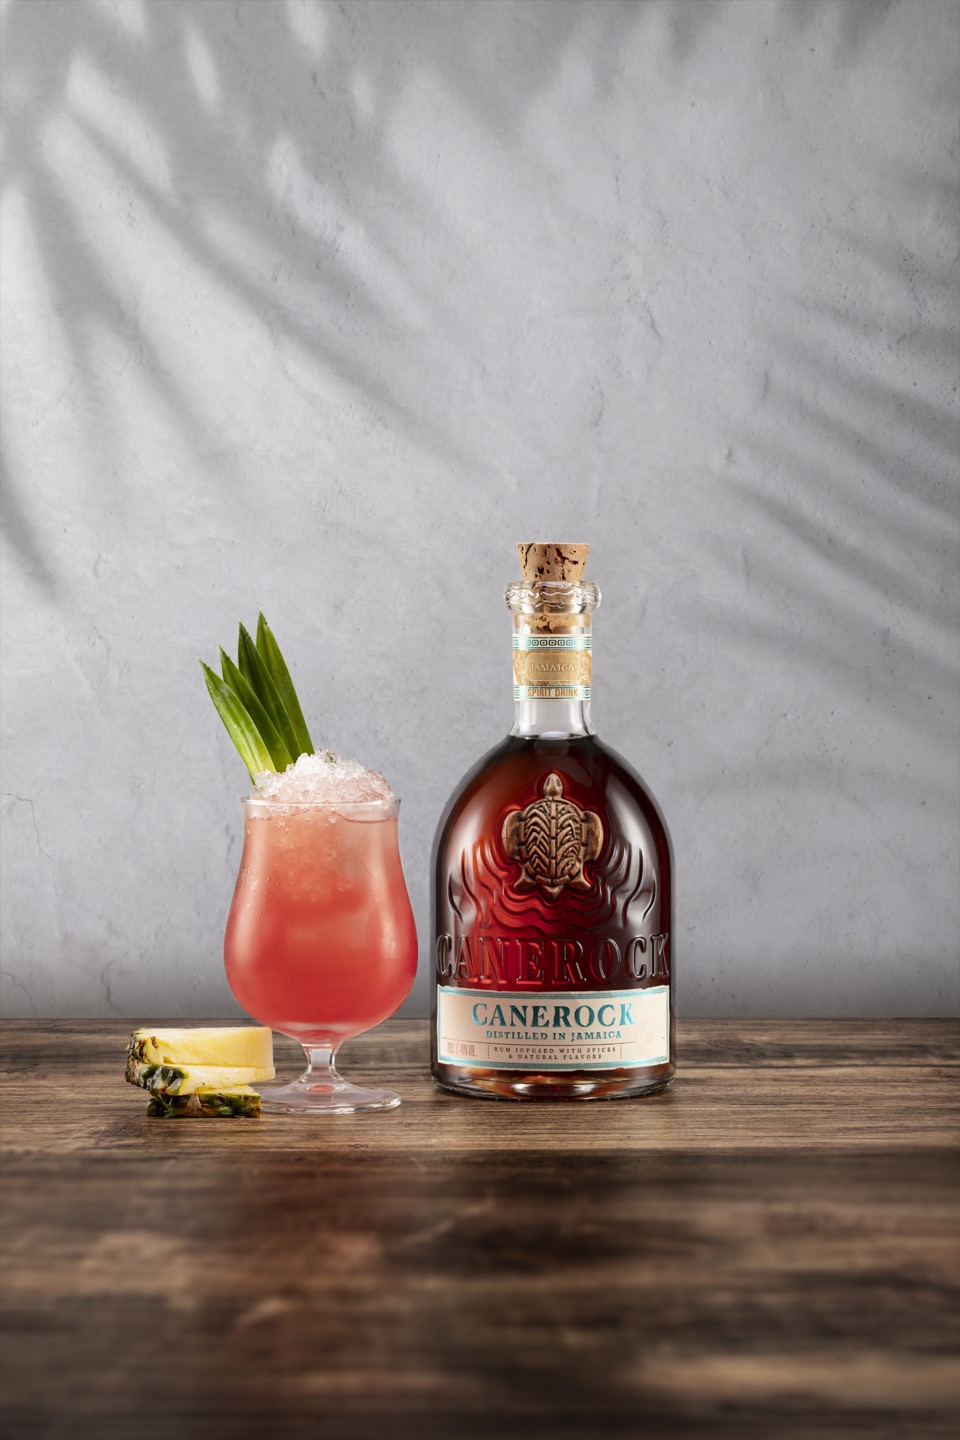 Canerock Jamaican Spiced Rum launched in Singapore - Inside Recent